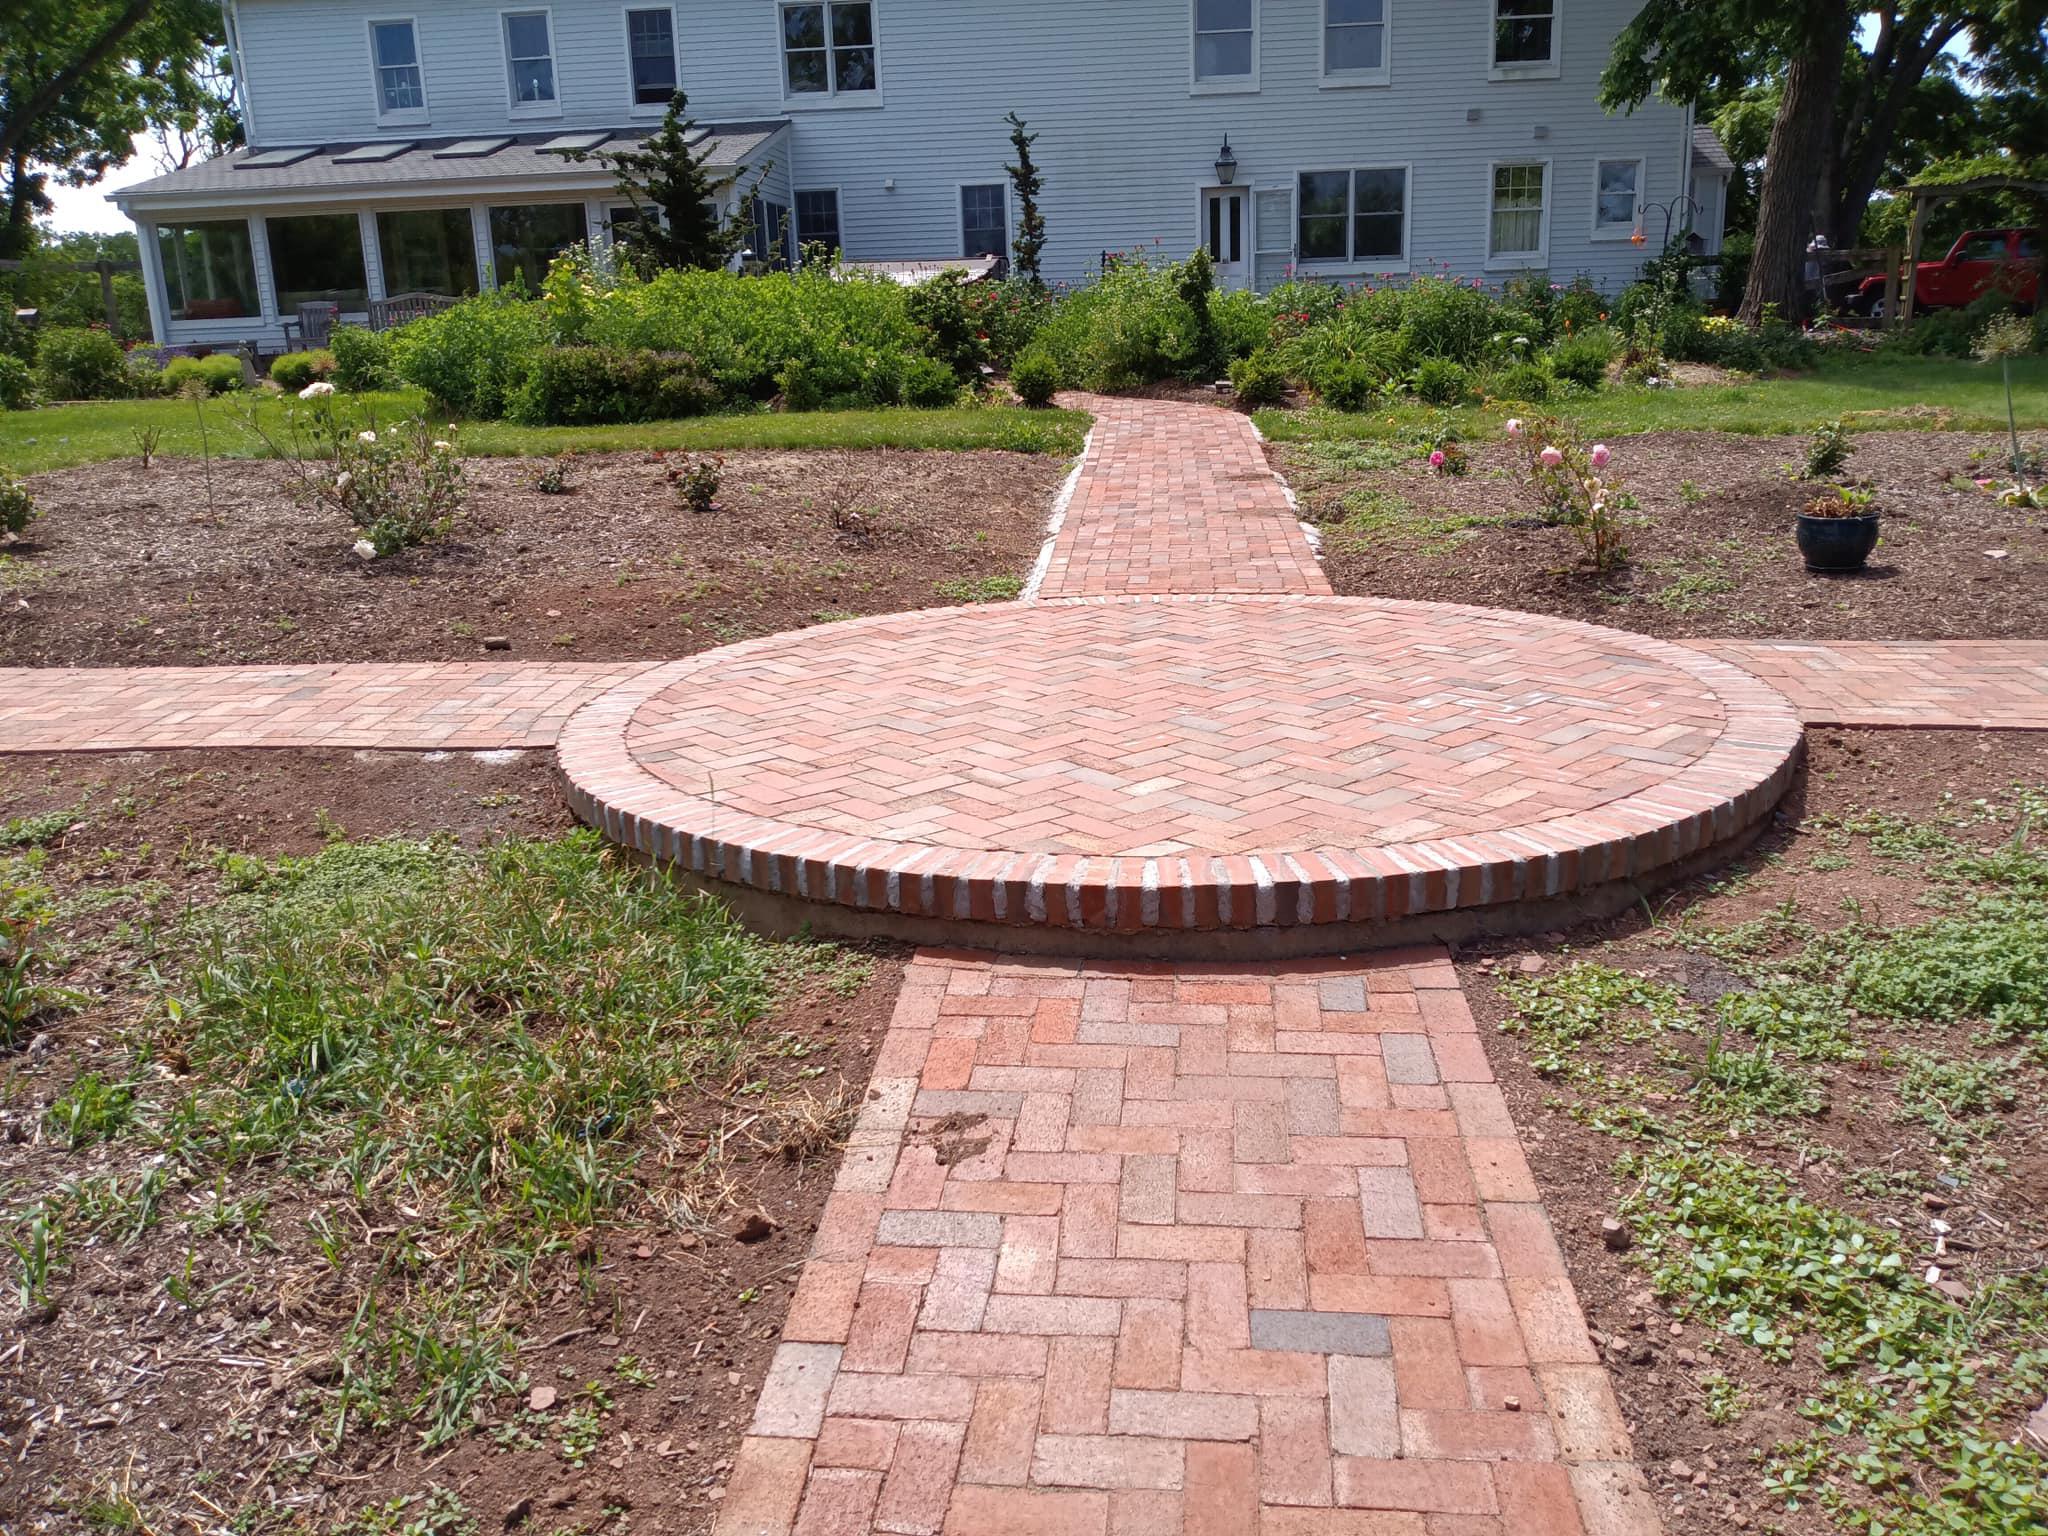 F.R.A Landscaping is a reputable landscaping company known for its commitment to excellence. With a portfolio of successful projects and satisfied clients, we bring professionalism and expertise to every landscaping endeavor. We are dedicated to delivering results that exceed your expectations.